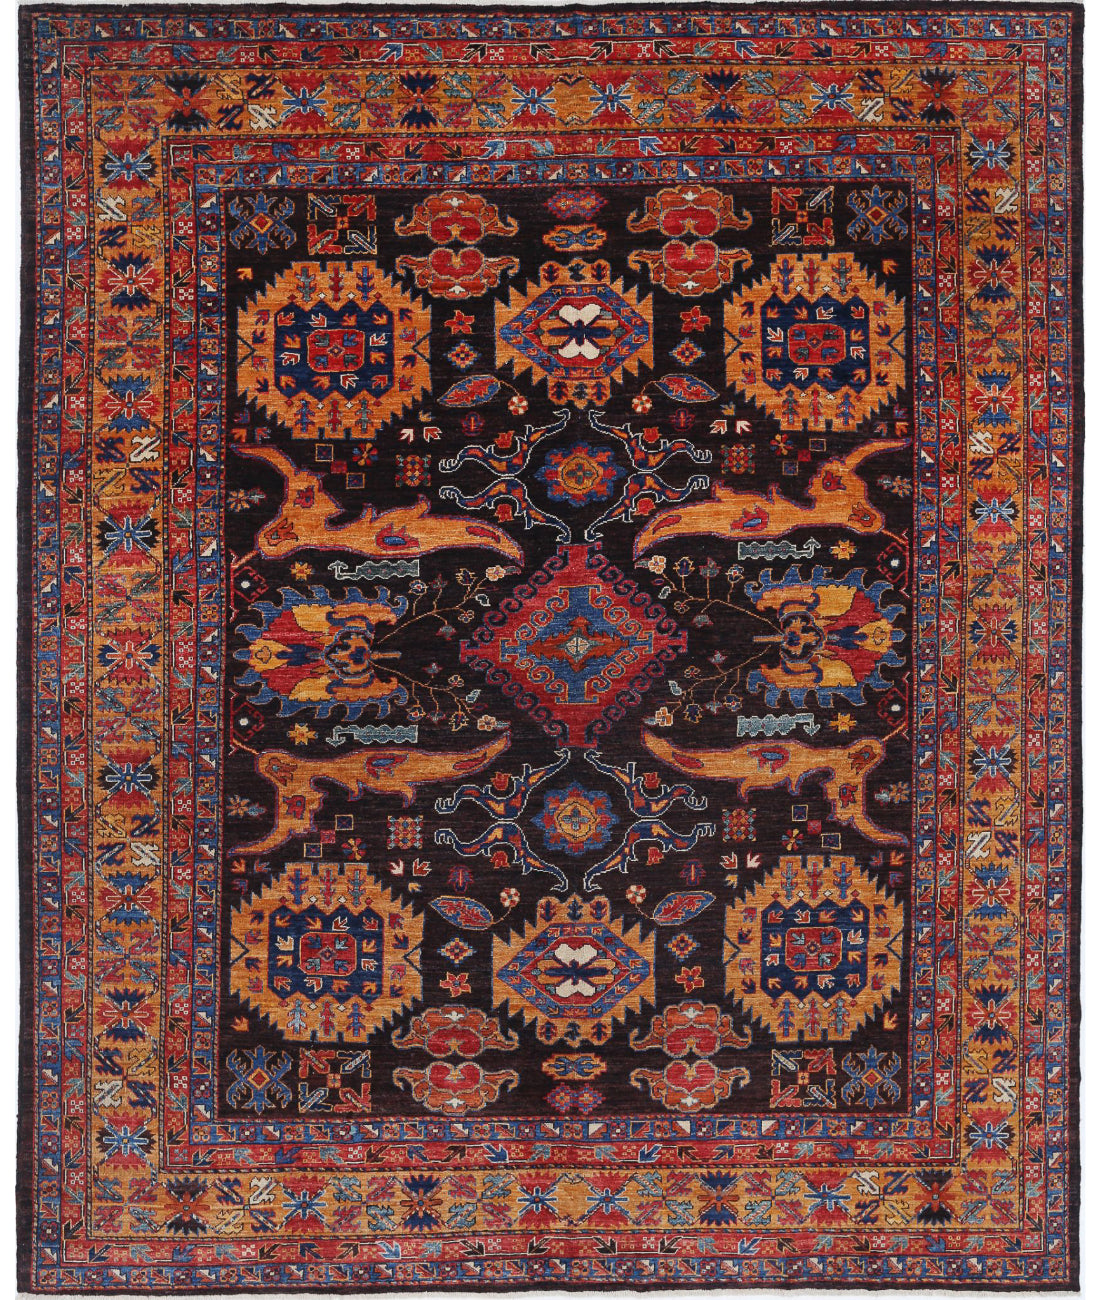 Hand Knotted Nomadic Caucasian Humna Wool Rug - 8'4'' x 10'2'' 8'4'' x 10'2'' (250 X 305) / Brown / Gold